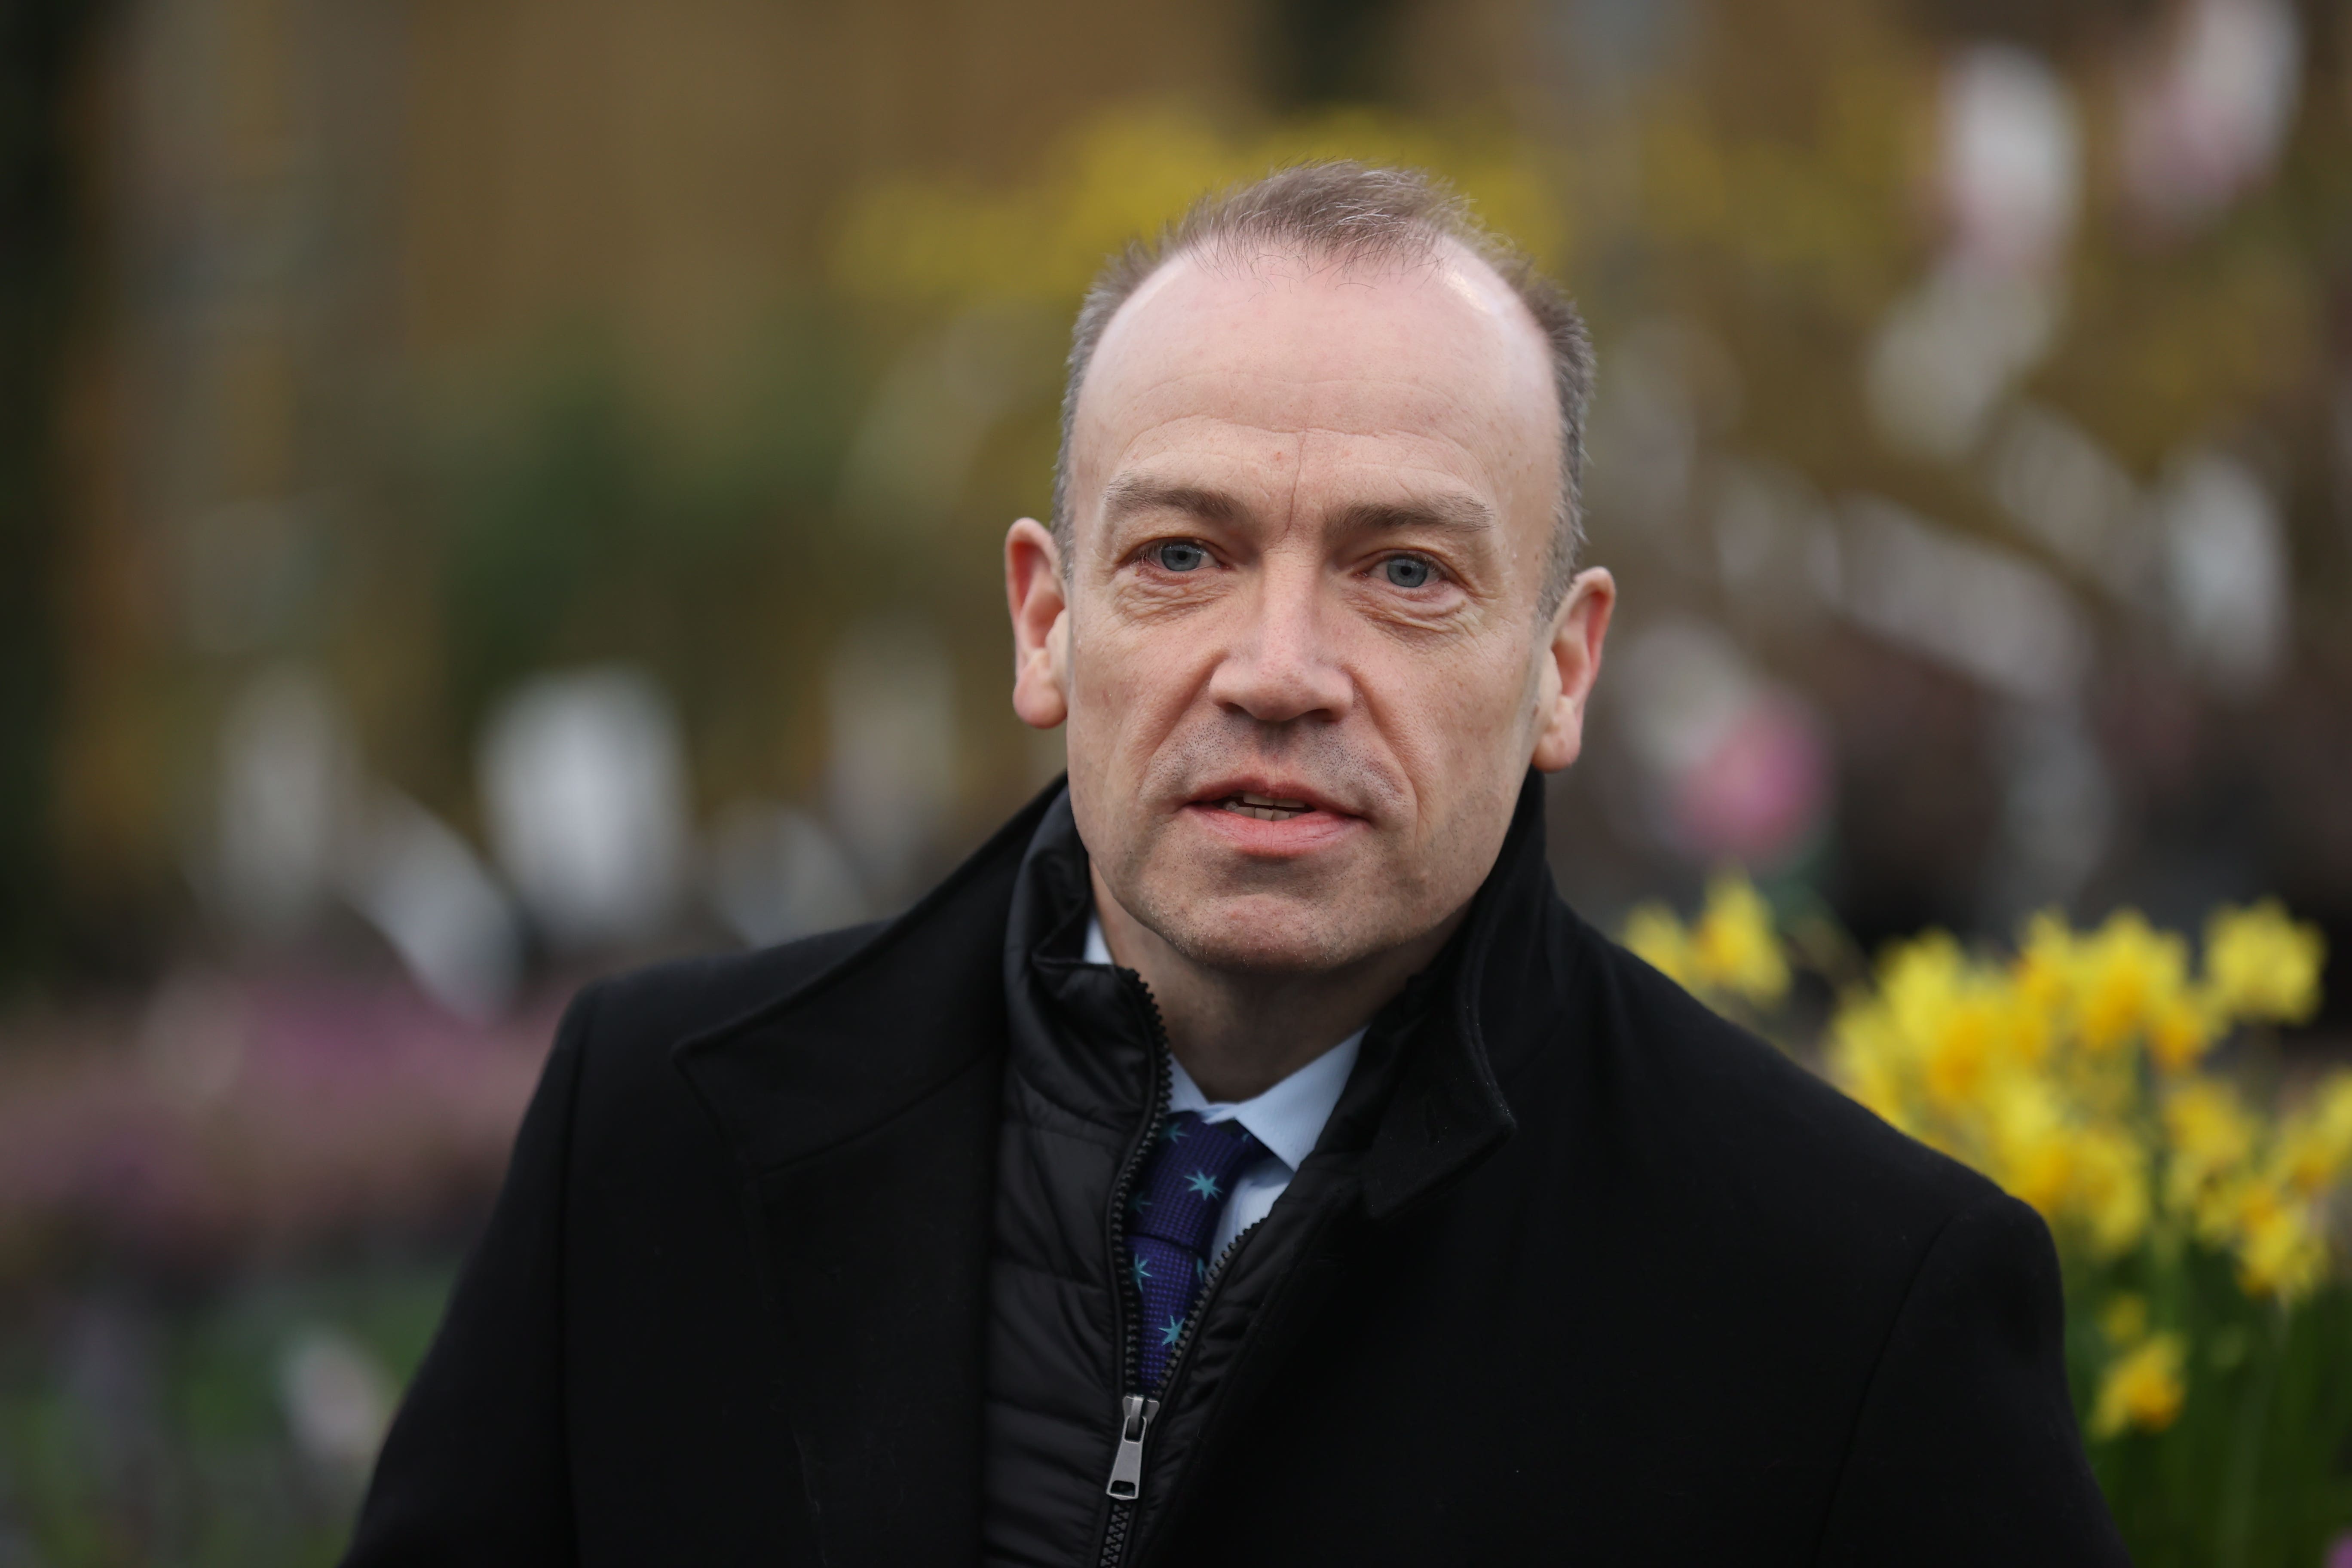 Northern Ireland Secretary Chris Heaton-Harris speaks to the media during a press conference outside the Hillmount Garden Centre, on the Upper Braniel Road in Belfast, during his visit to Northern Ireland to sell the Windsor Framework deal. Picture date: Thursday March 9, 2023.